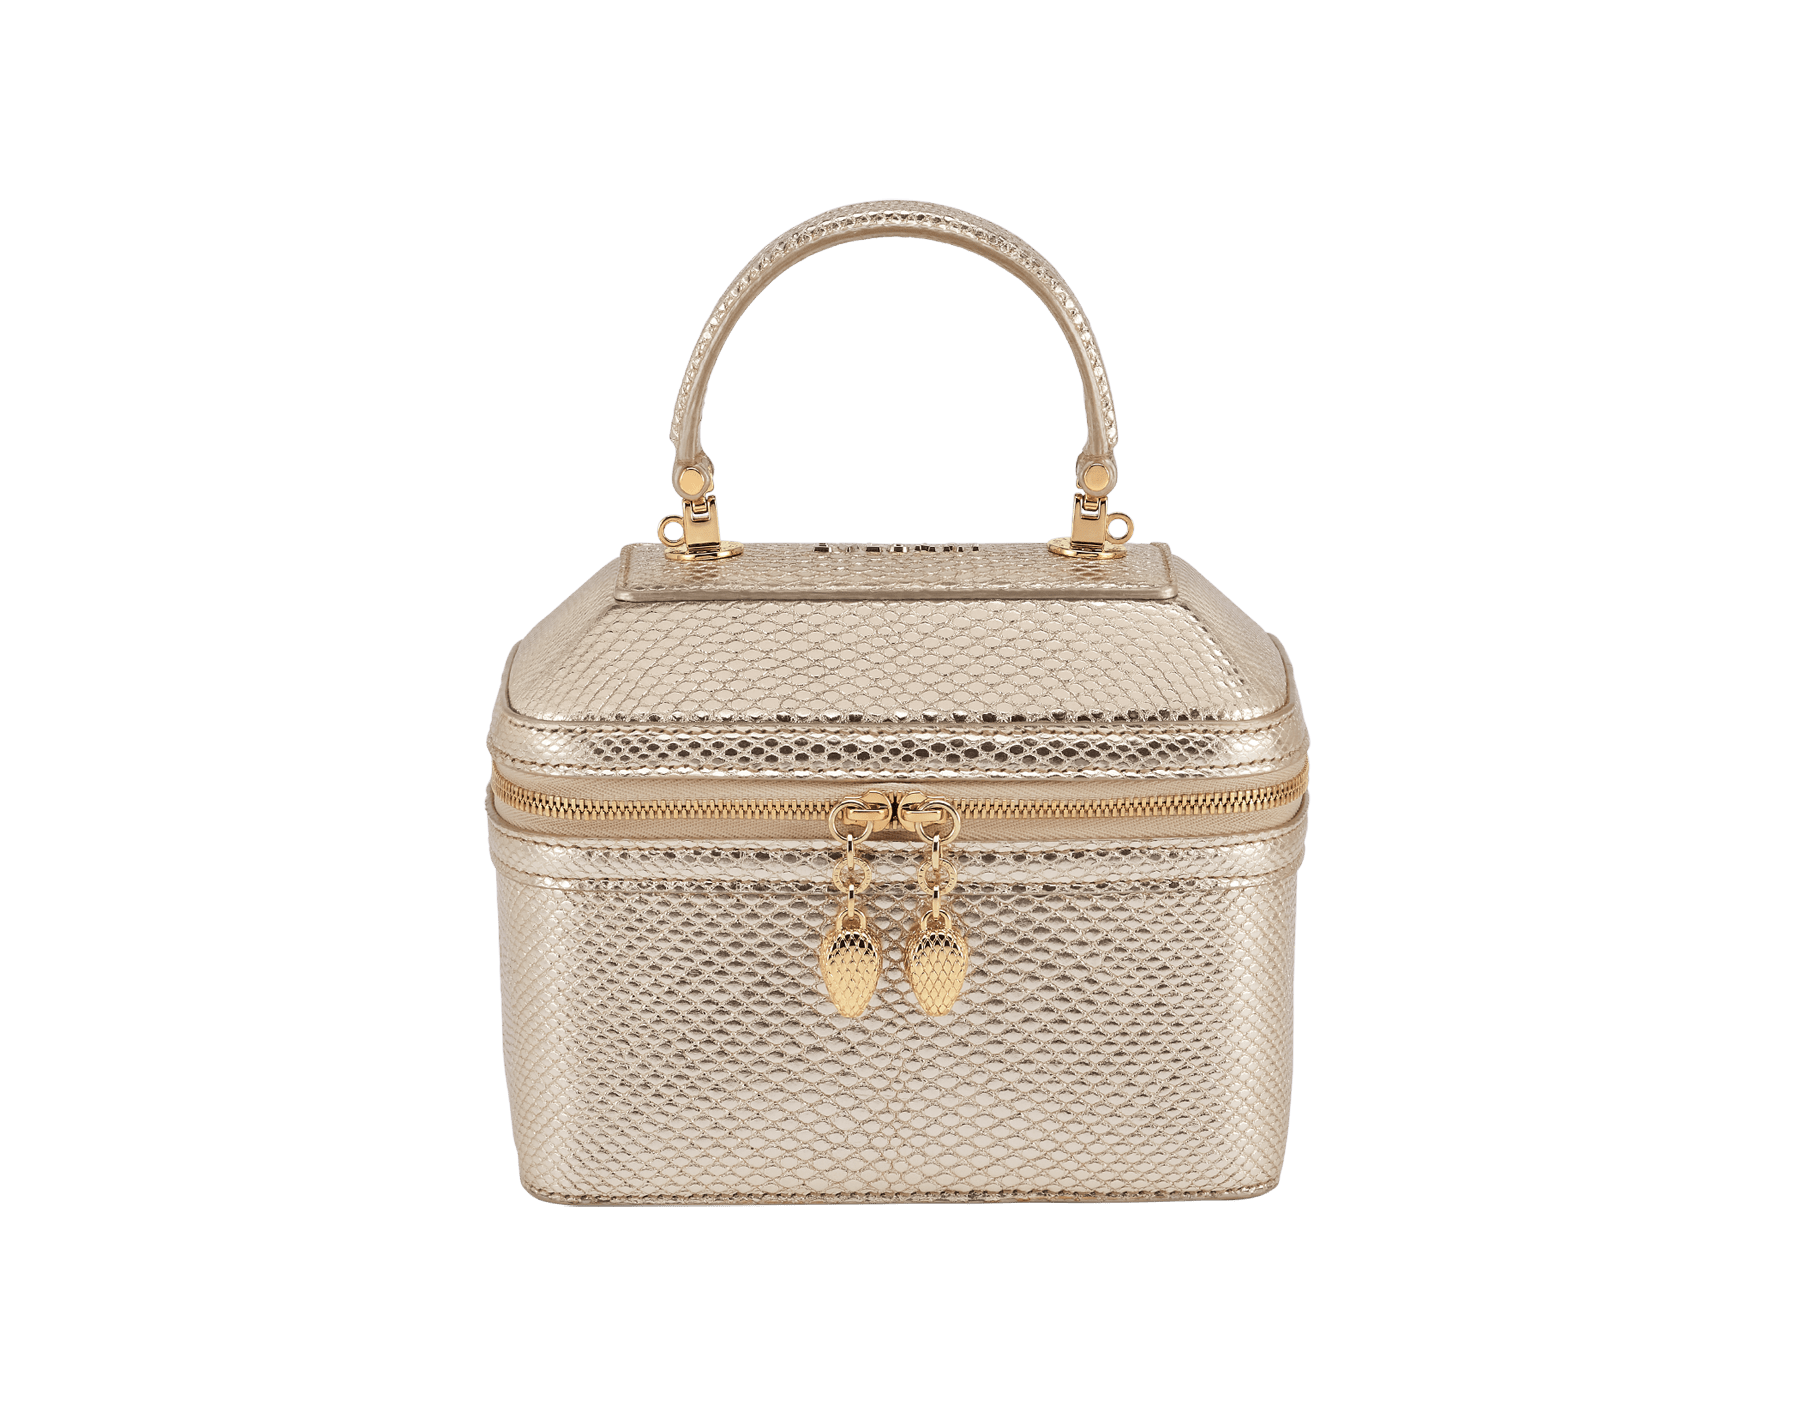 Serpenti Forever jewelry box bag in light gold Molten karung skin with black nappa leather lining. Captivating snakehead zip pullers and chain strap decors in light gold-plated brass. 1177-MoltK image 1